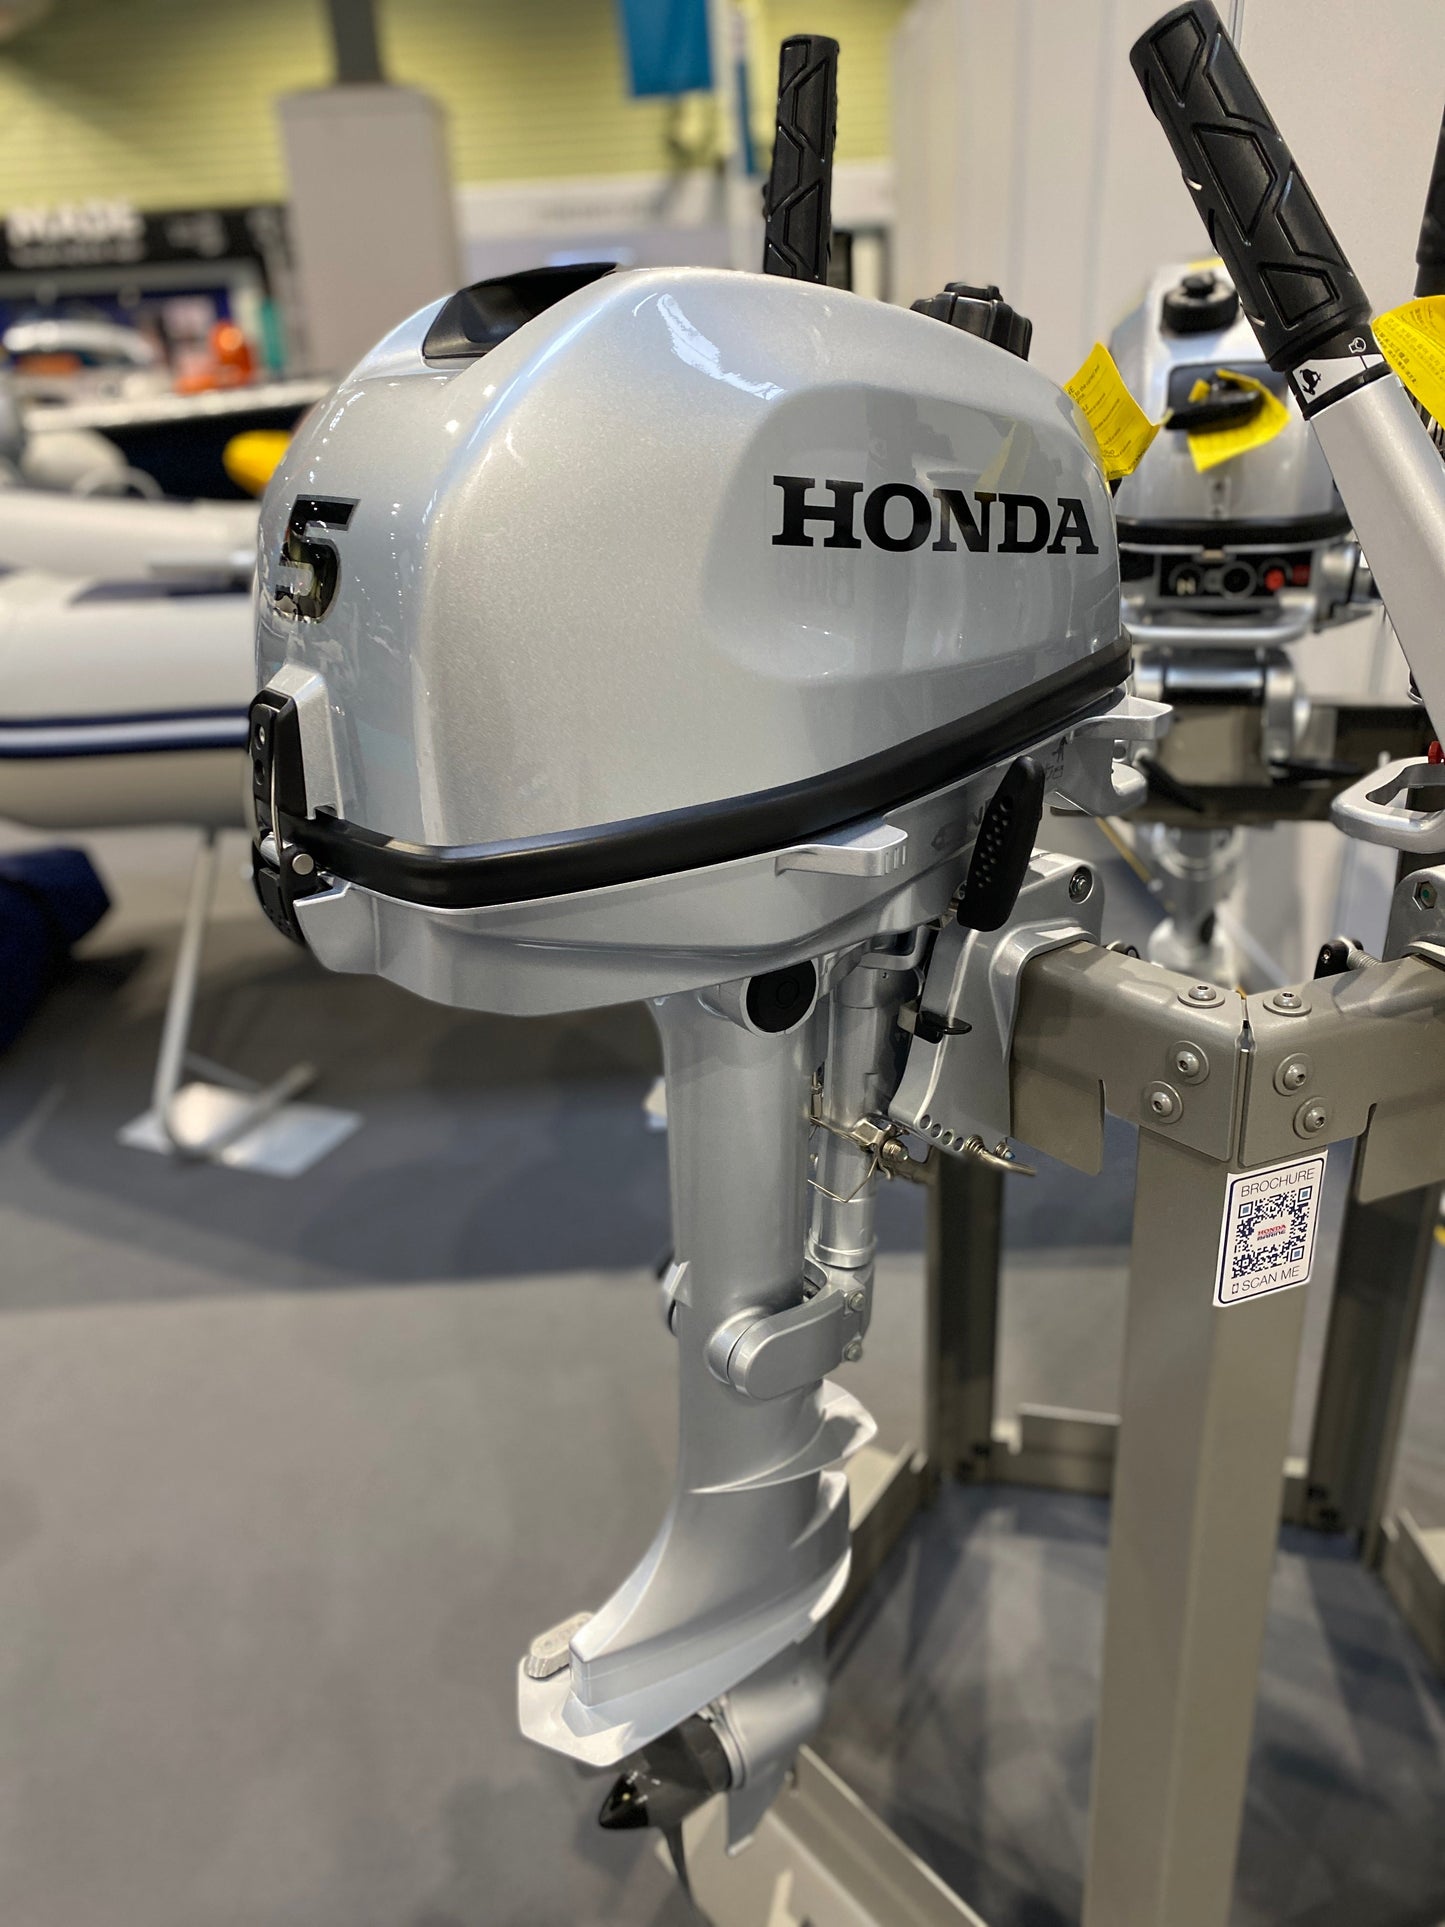 Honda Outboard BF5 LHU 5hp Long Shaft and 6 amp charging coil